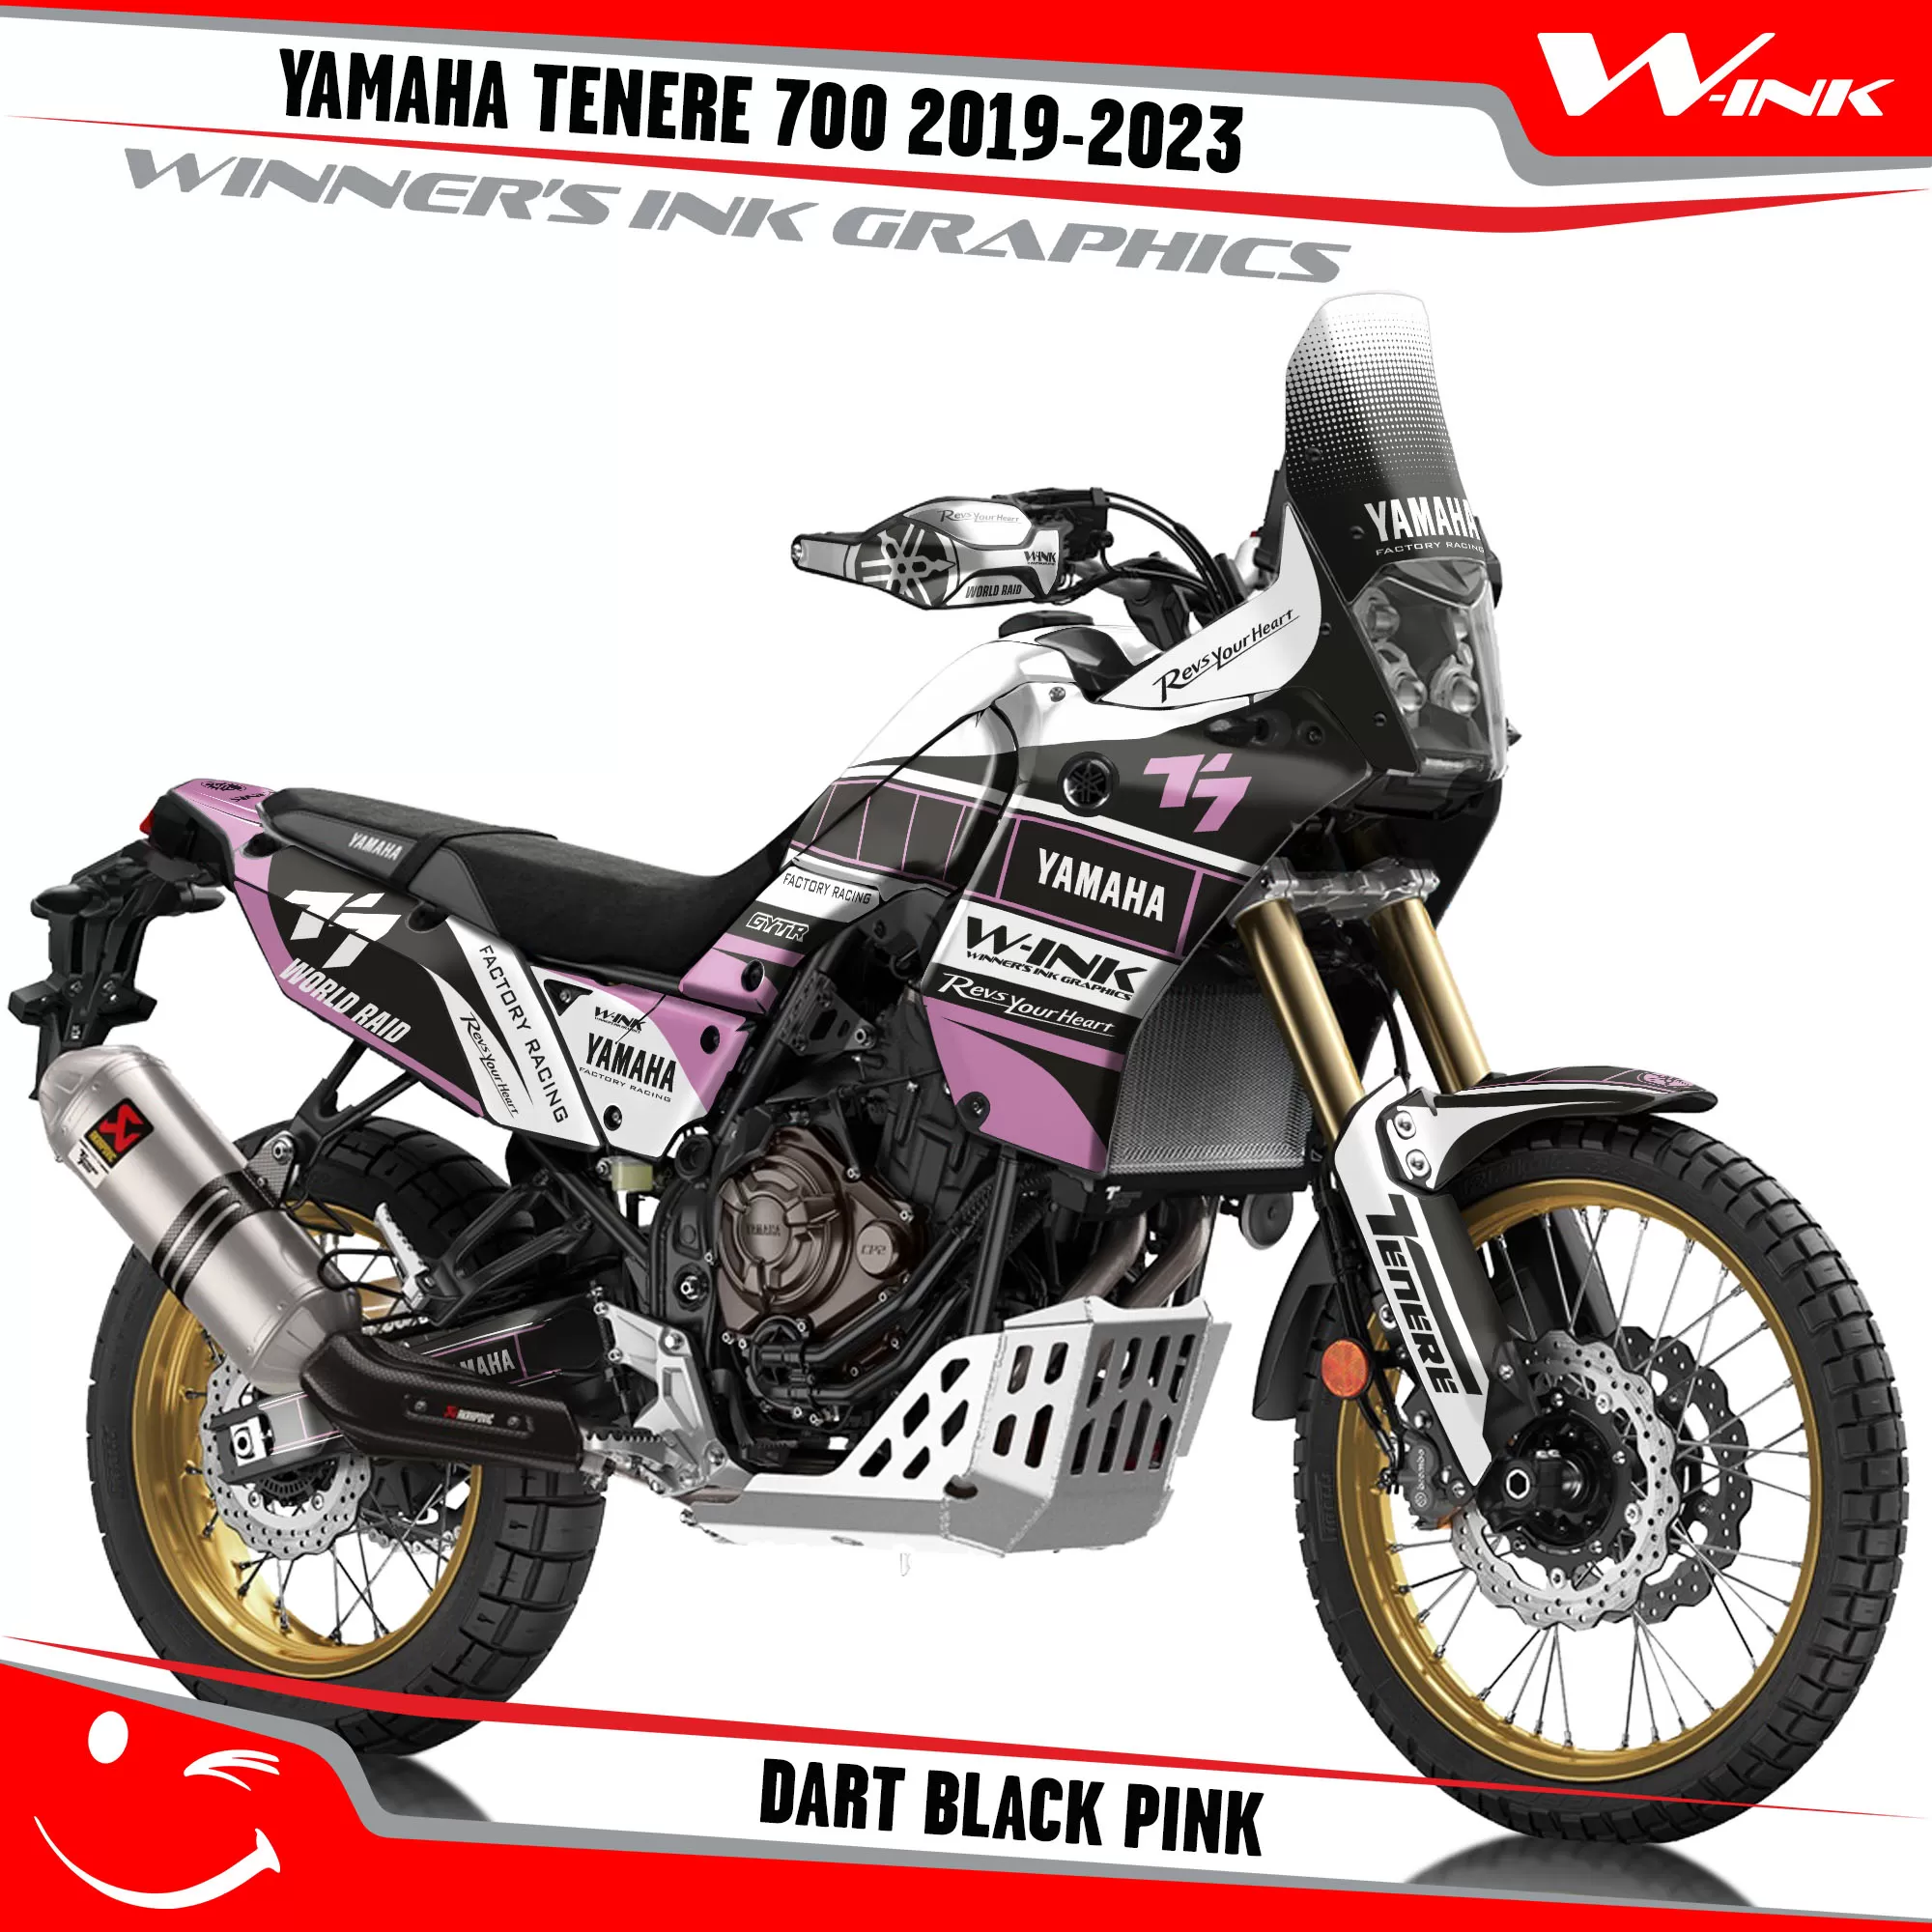 Yamaha-Tenere-700-2019-2020-2021-2022-2023-graphics-kit-and-decals-with-desing-Dart-Black-Pink